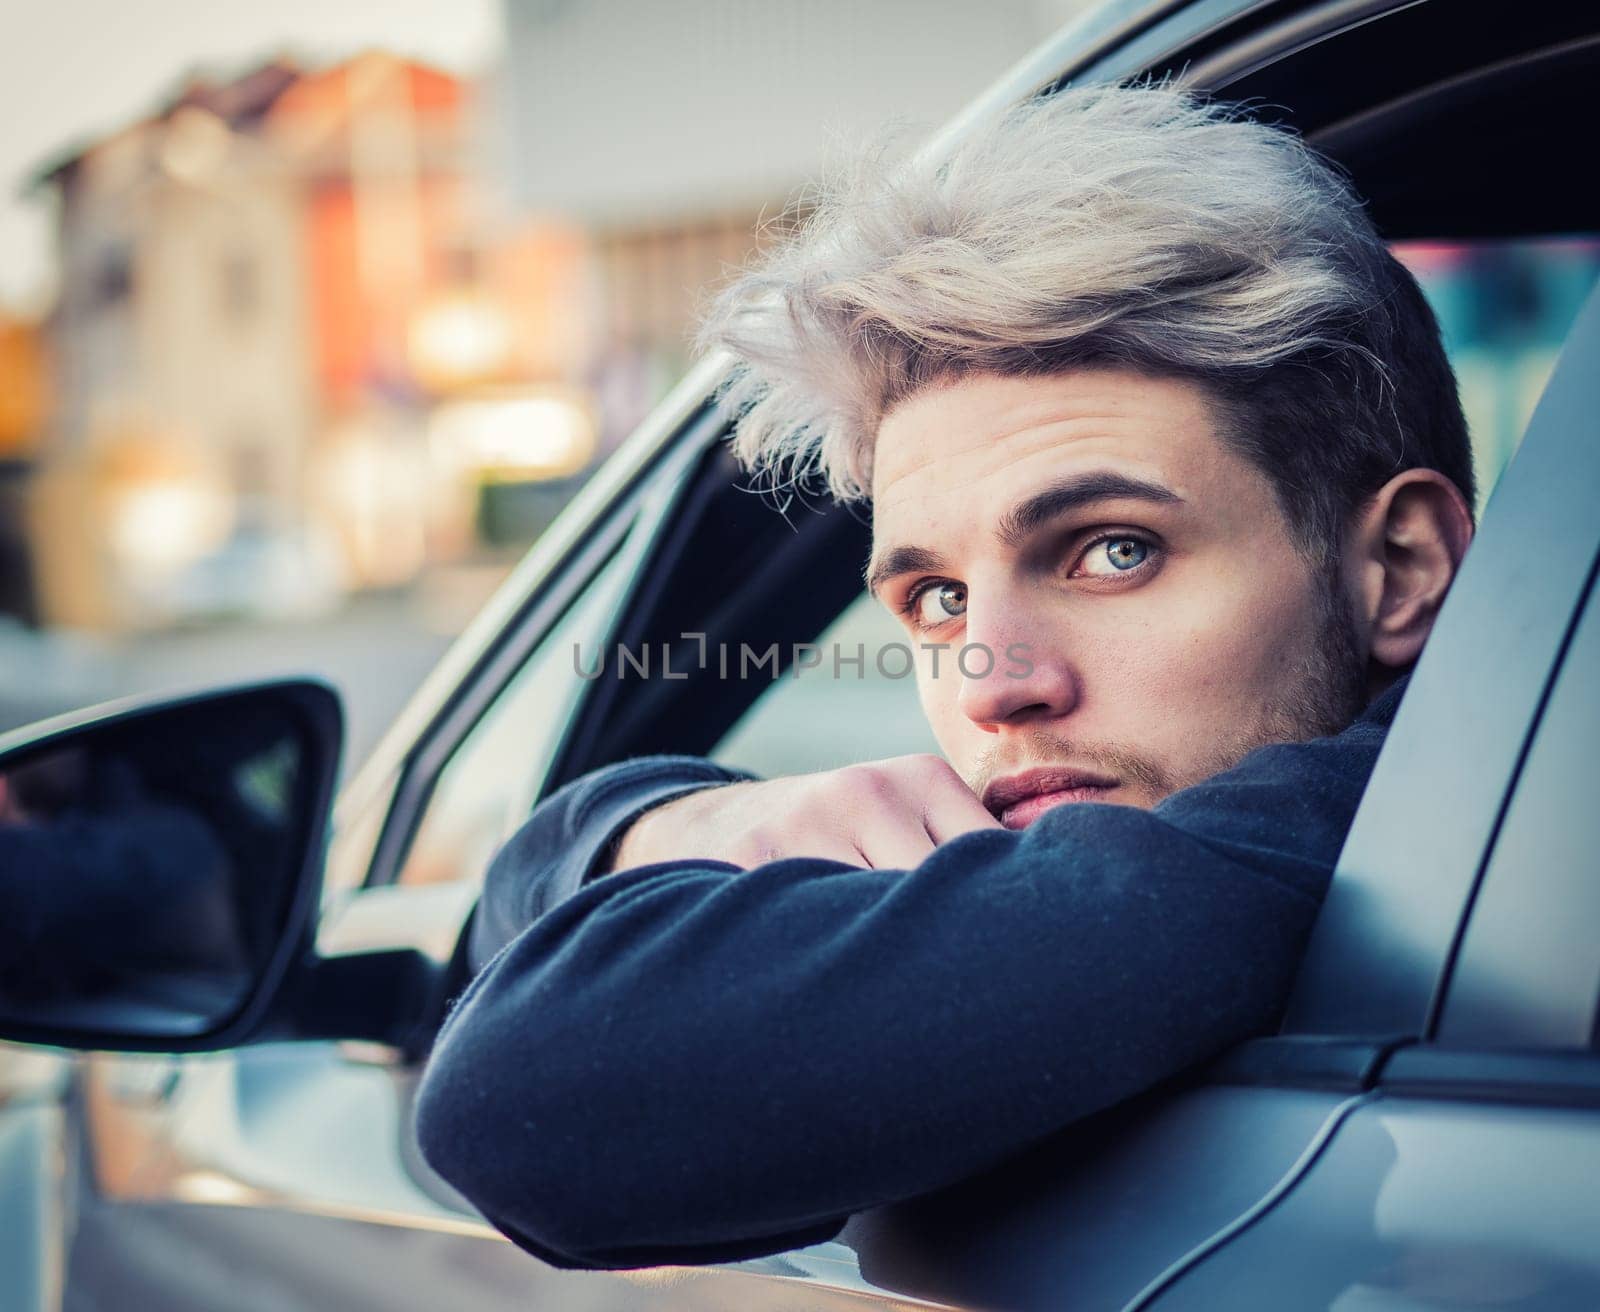 A man leaning his head out of a car window. Photo of a man leaning out of a car window, looking at camera